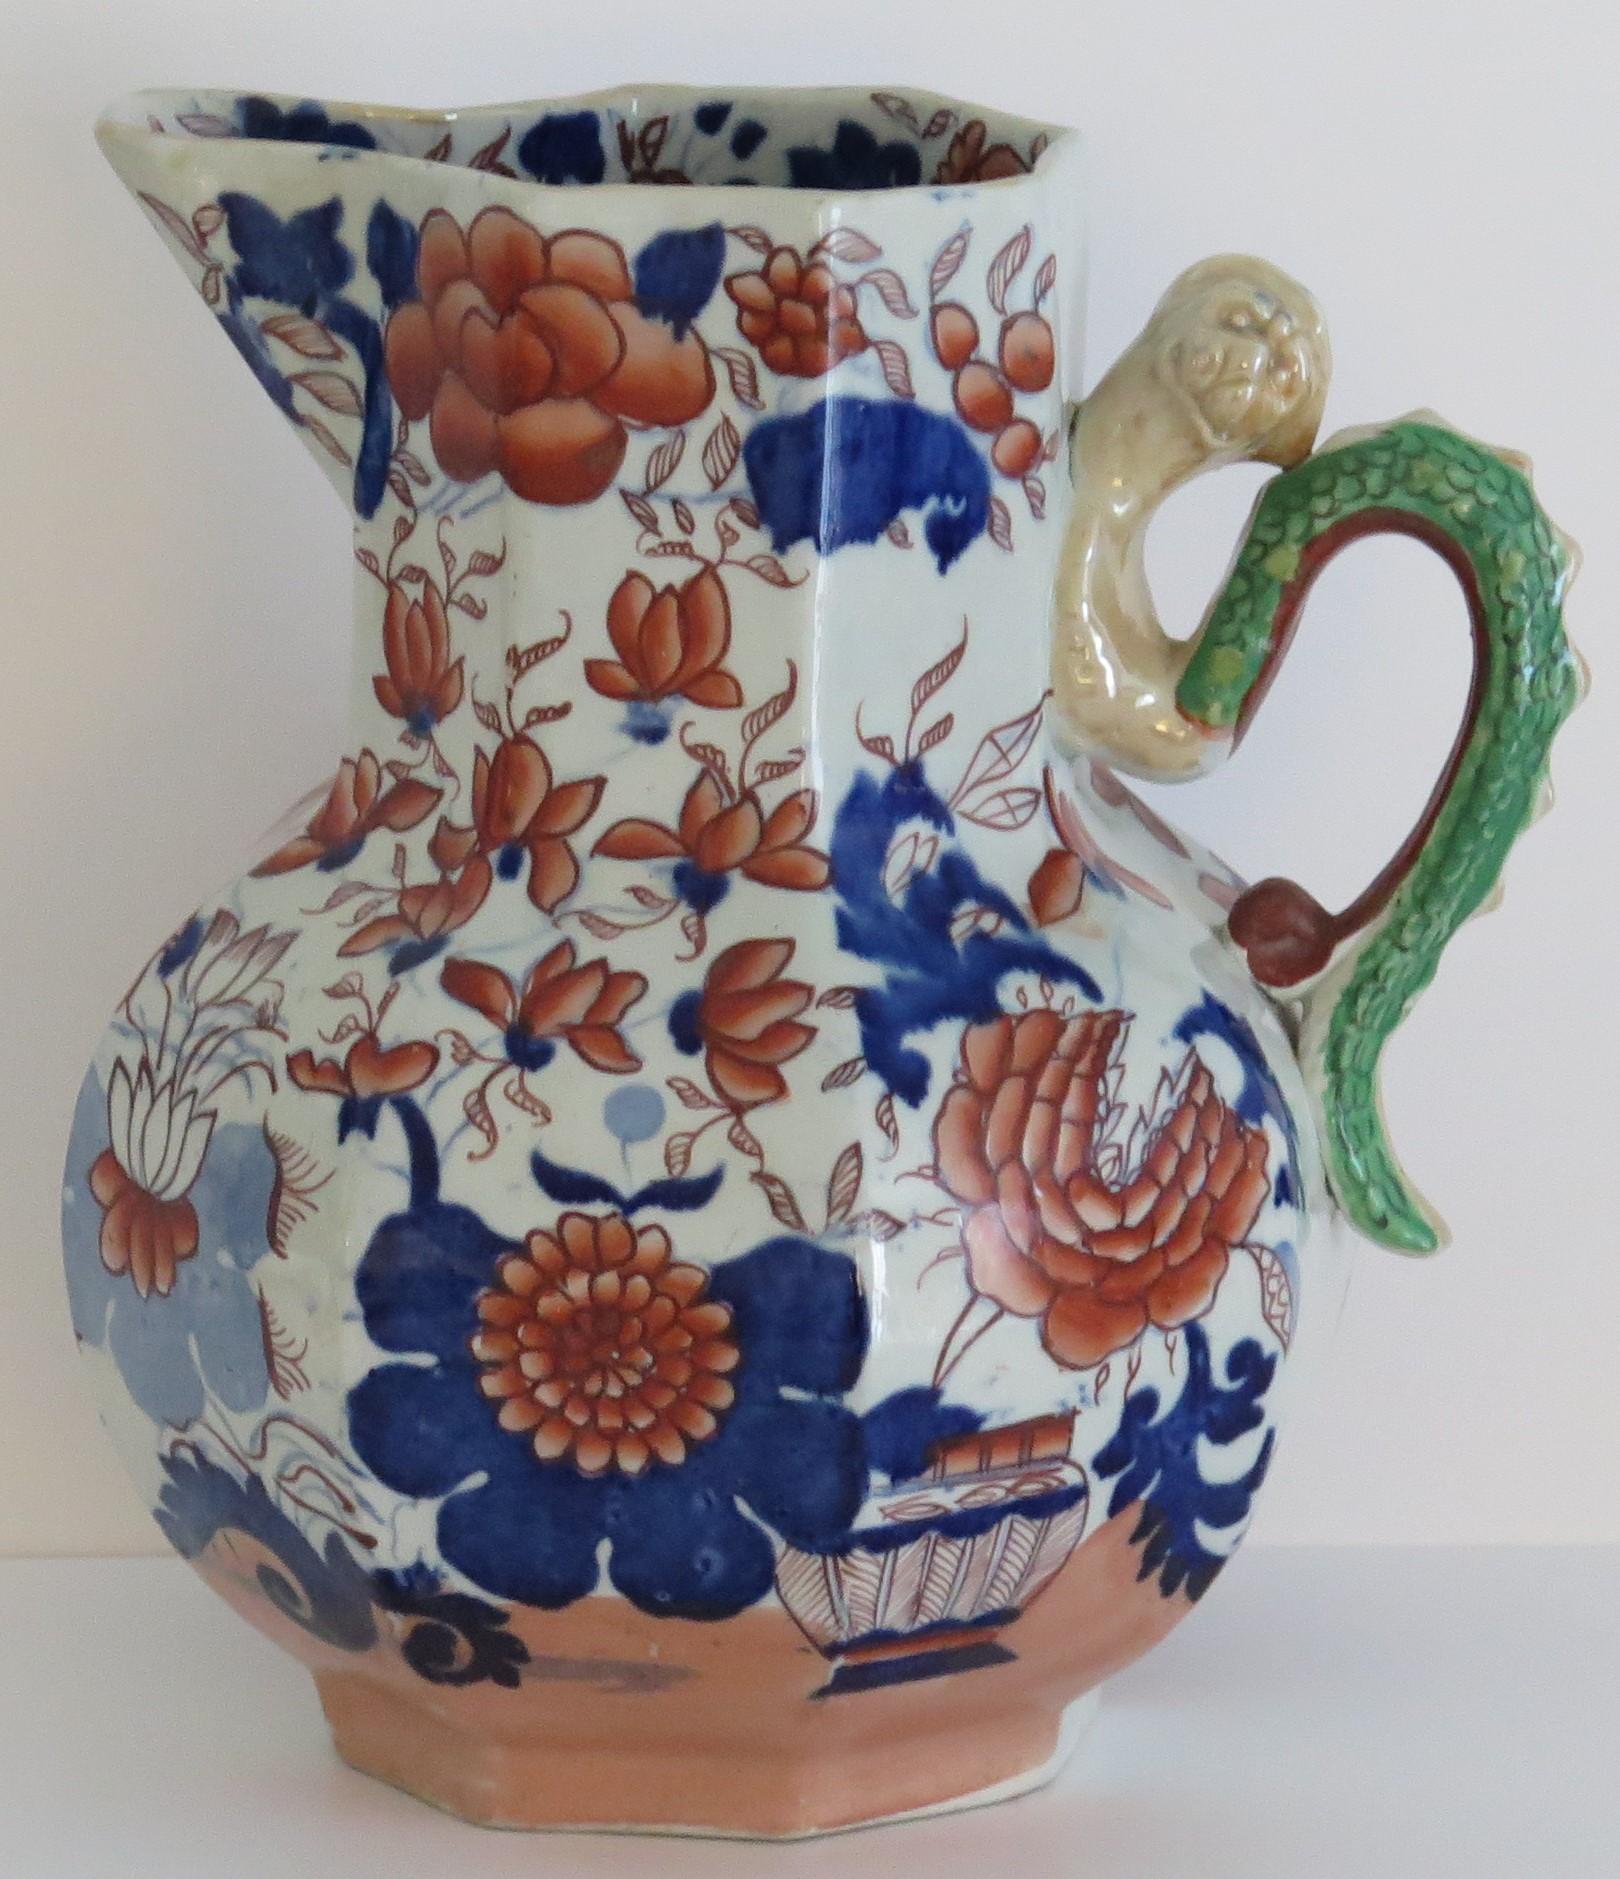 This is a very good, early, large and very rare Mason's Ironstone Jug or Pitcher in the Basket Japan pattern, made in the English, late Georgian period, circa 1815-1820.

This jug has a very rare shape and is particularly decorative, being a much